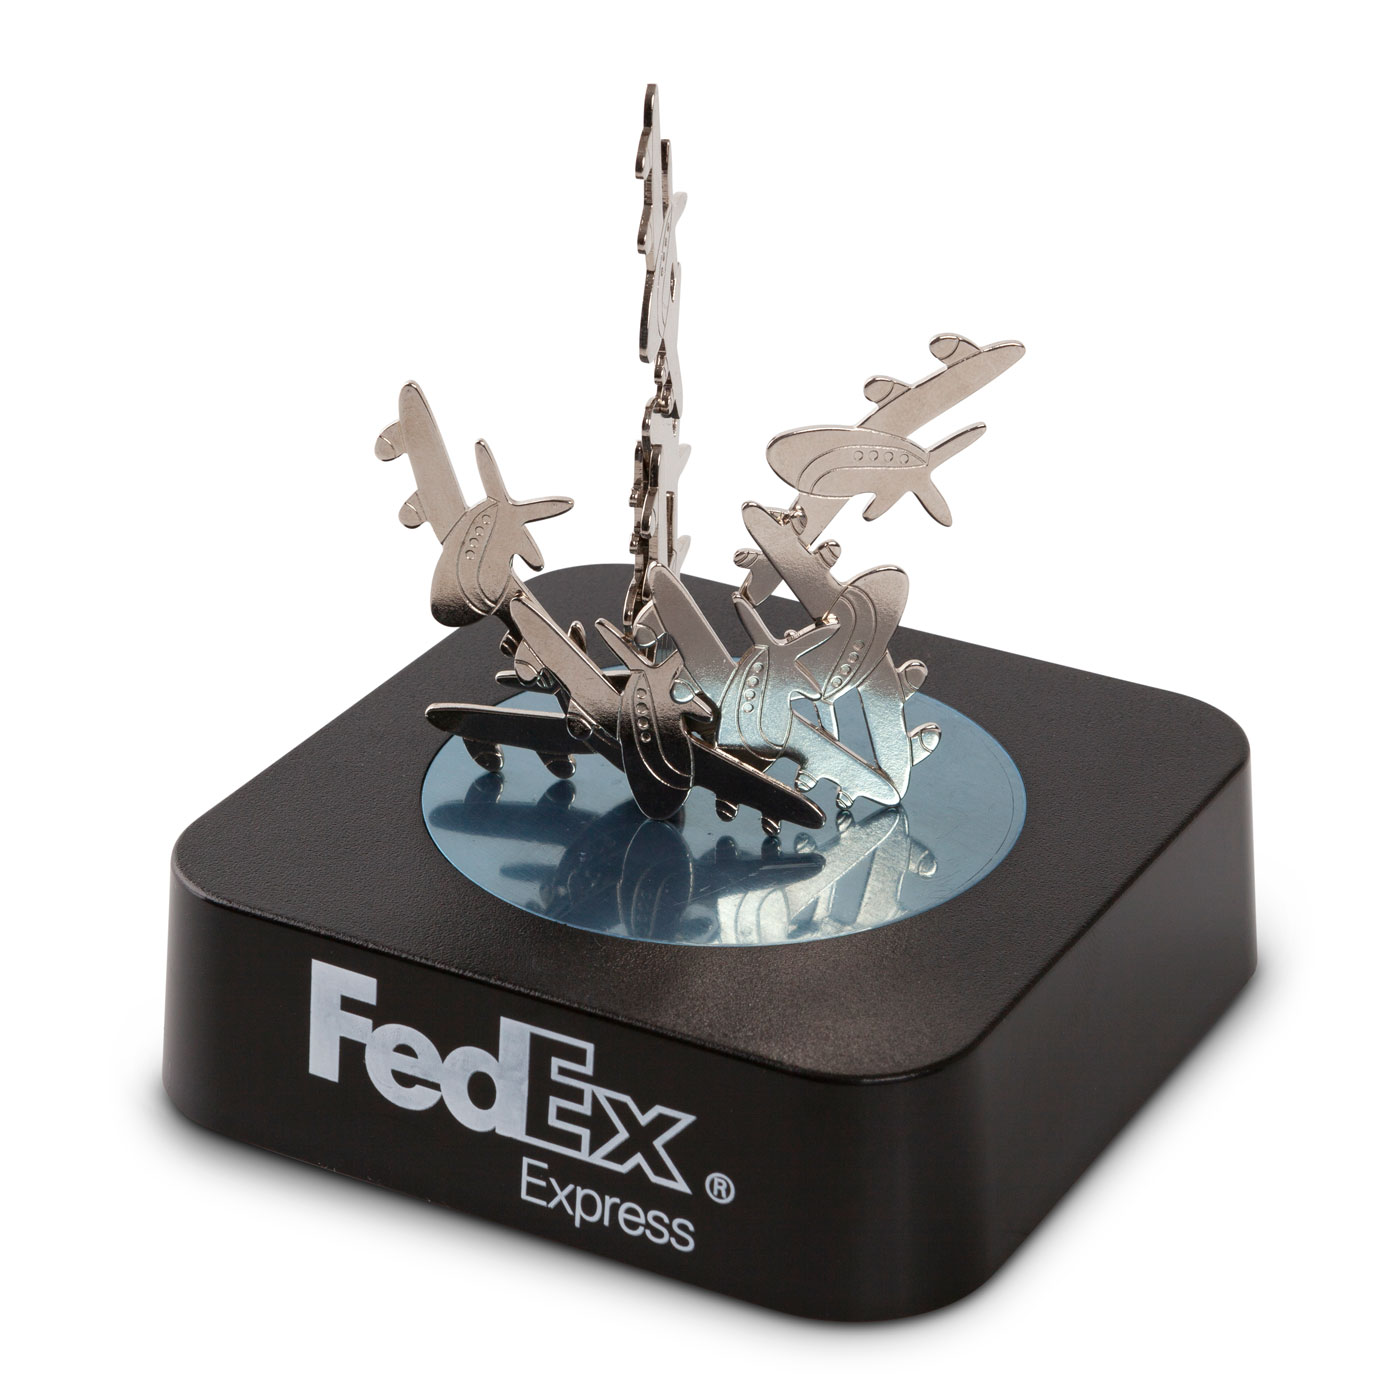 Fedex Express Magnetic Airplane Sculpture Block The Fedex Company Store 1714